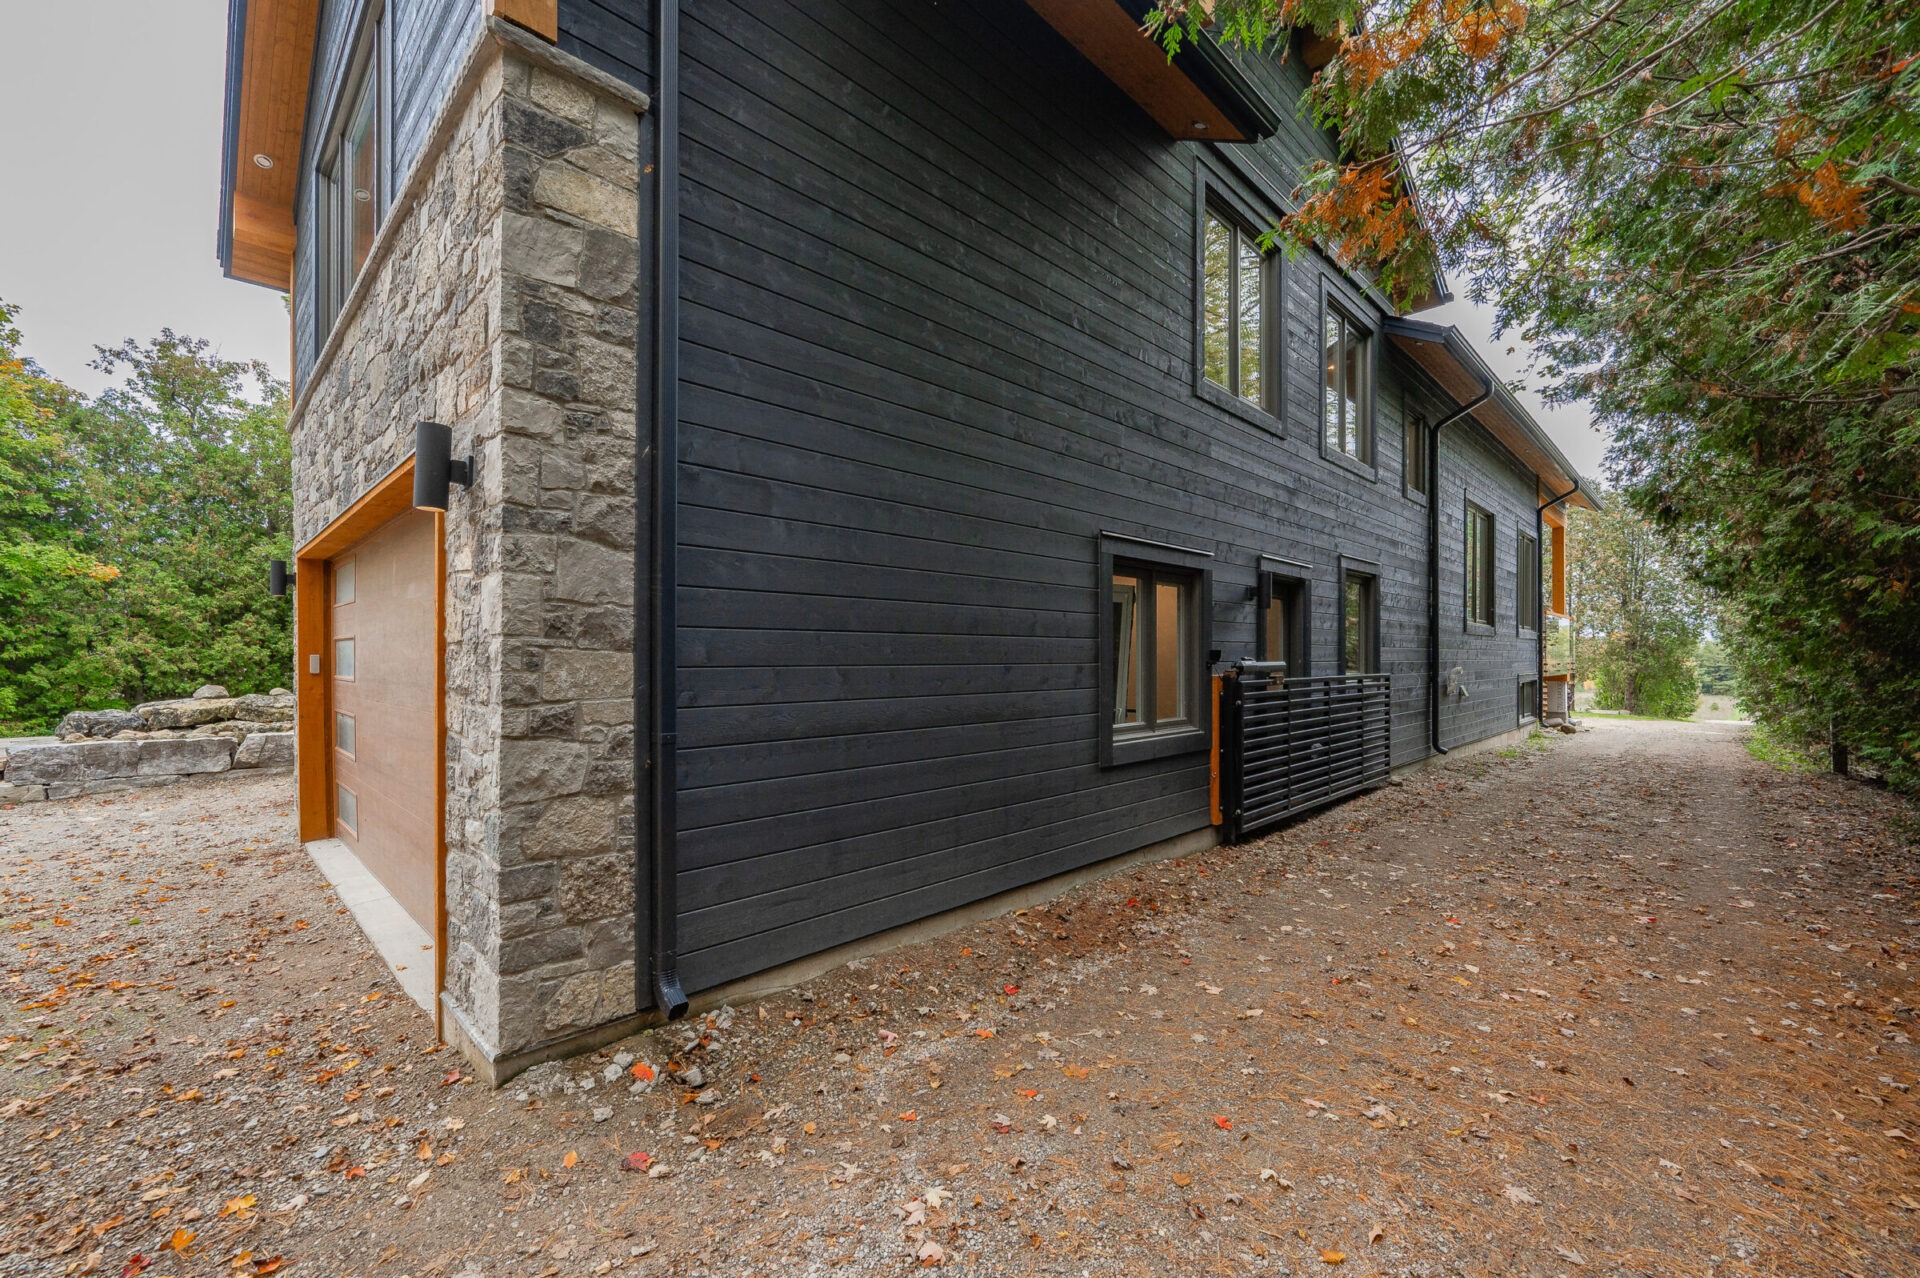 Modern two-story house with dark siding and stone accent wall, surrounded by trees with a gravel path leading to the entrance.